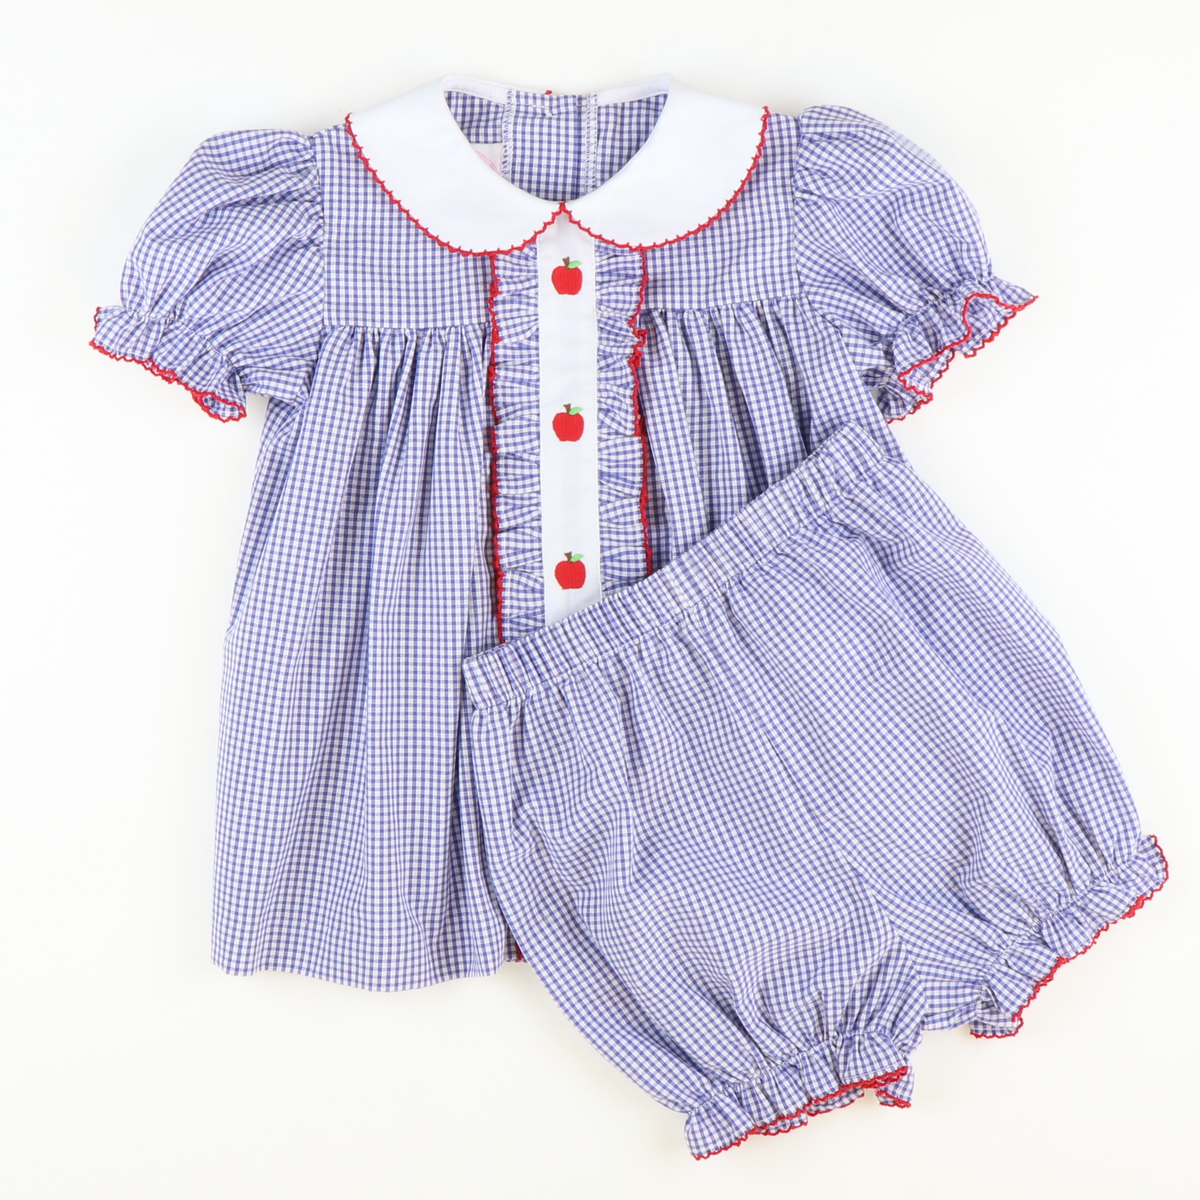 Embroidered Apples Top & Bloomer Set - Royal Blue Sandra Gingham Plaid - Stellybelly